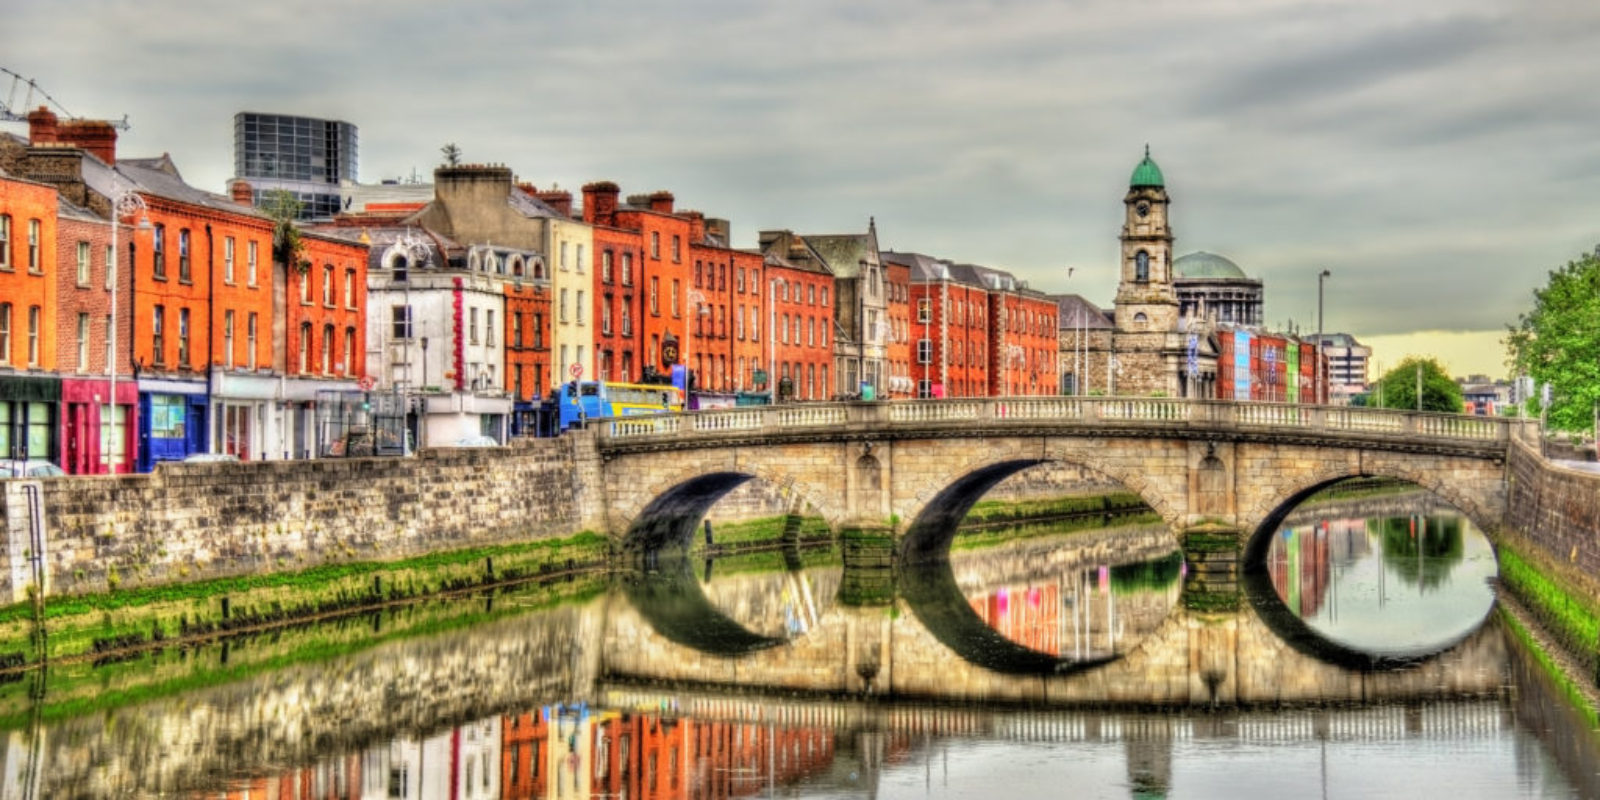 Dublin, Ireland is home to not just the popular Guinness Brewery but also Grafton Street bars, the famous Book of Kells, and plenty of good old Irish craic!